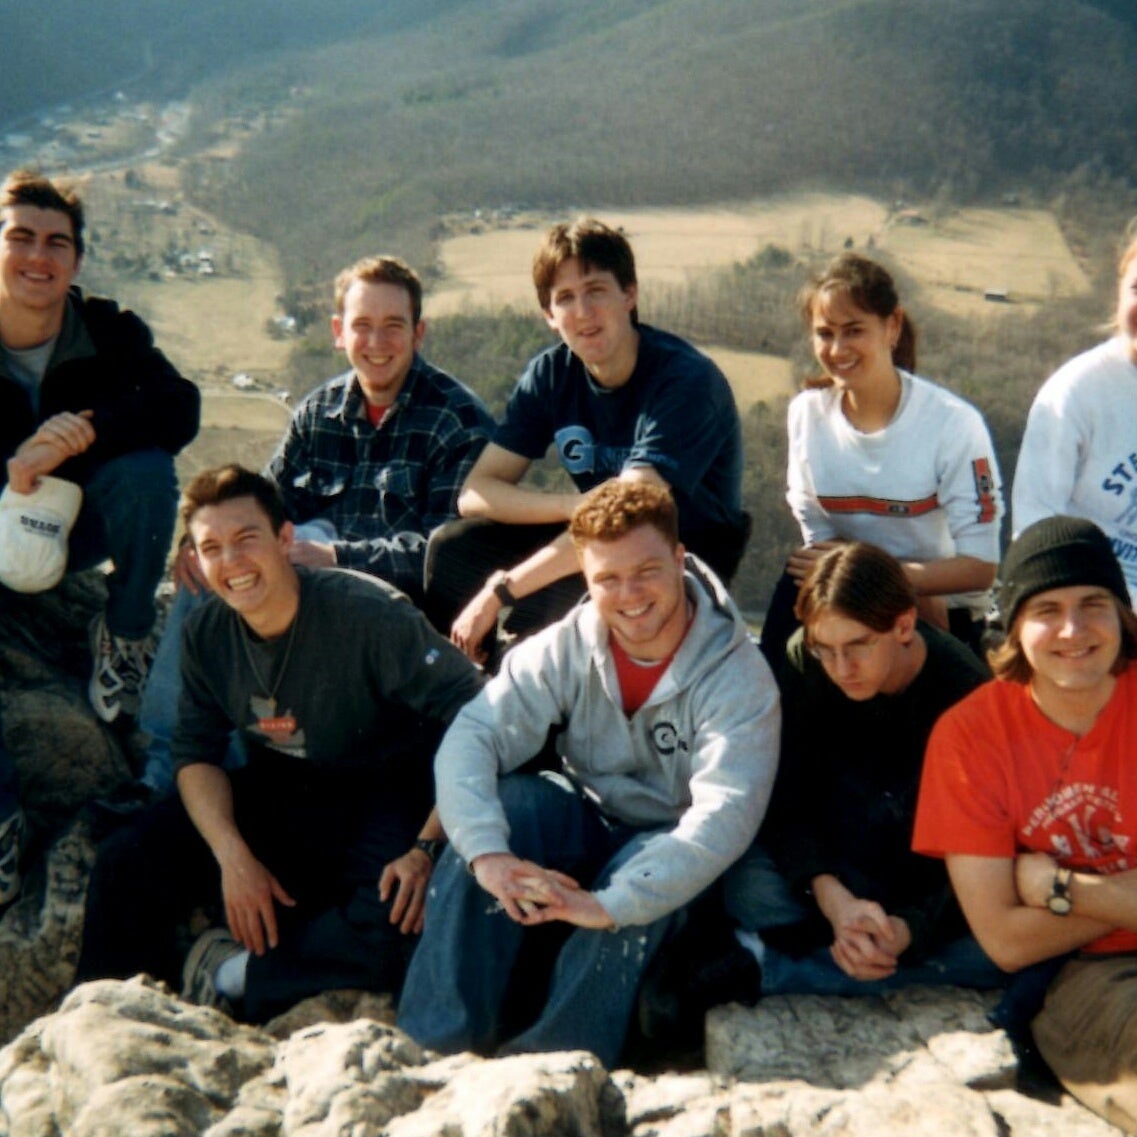 Daniel Rigby with friends at a scenic viewpoint in West Virginia